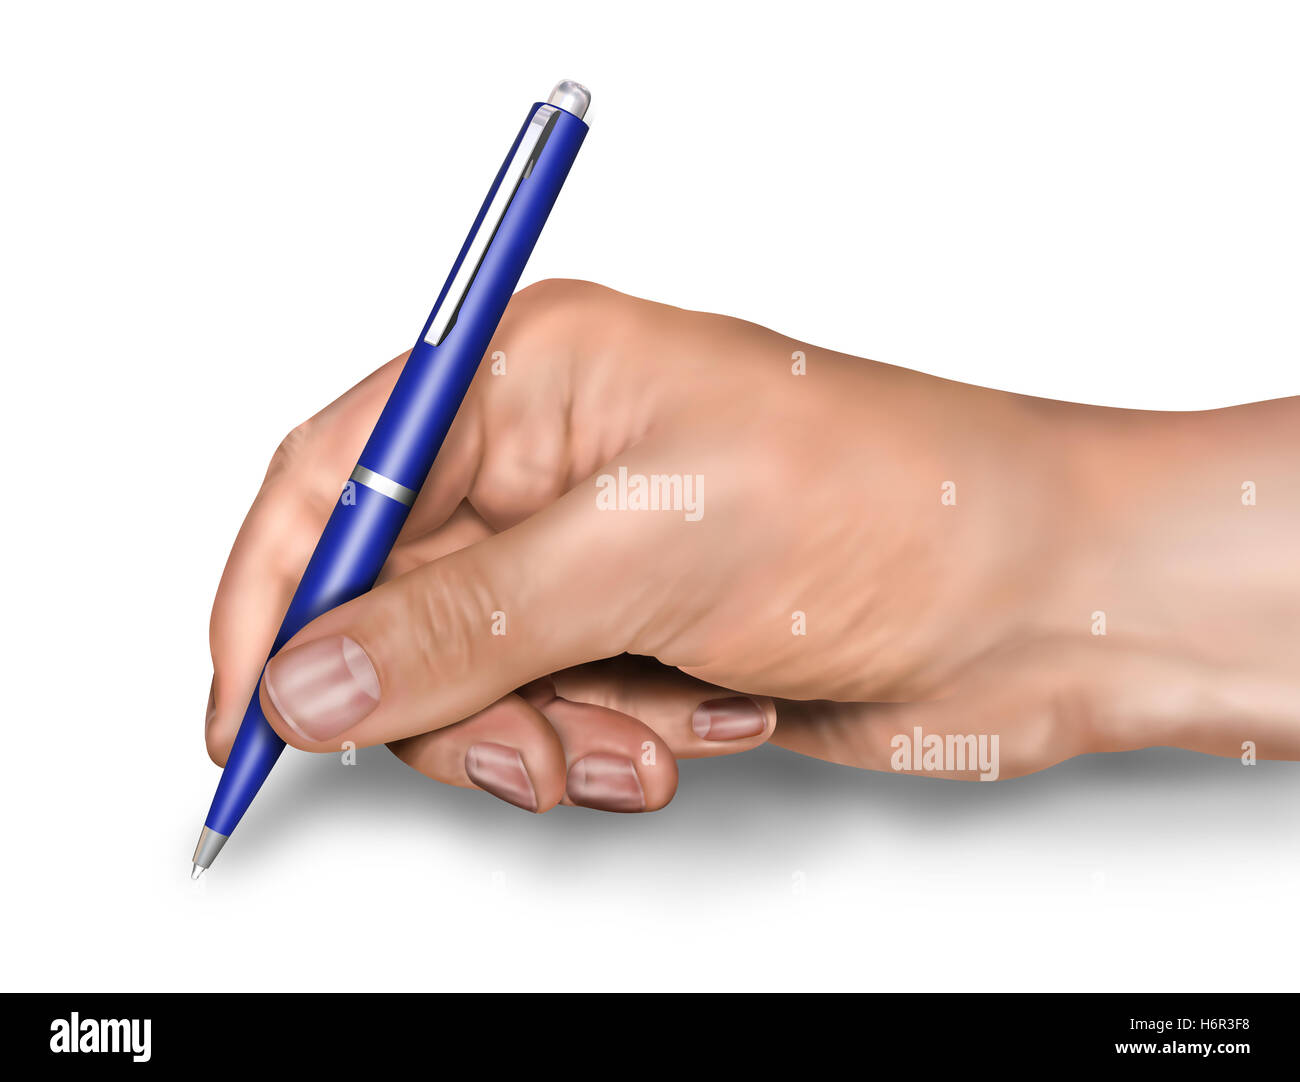 write wrote writing writes autograph author writer sign signing hand give pen style pencil application write wrote writing Stock Photo